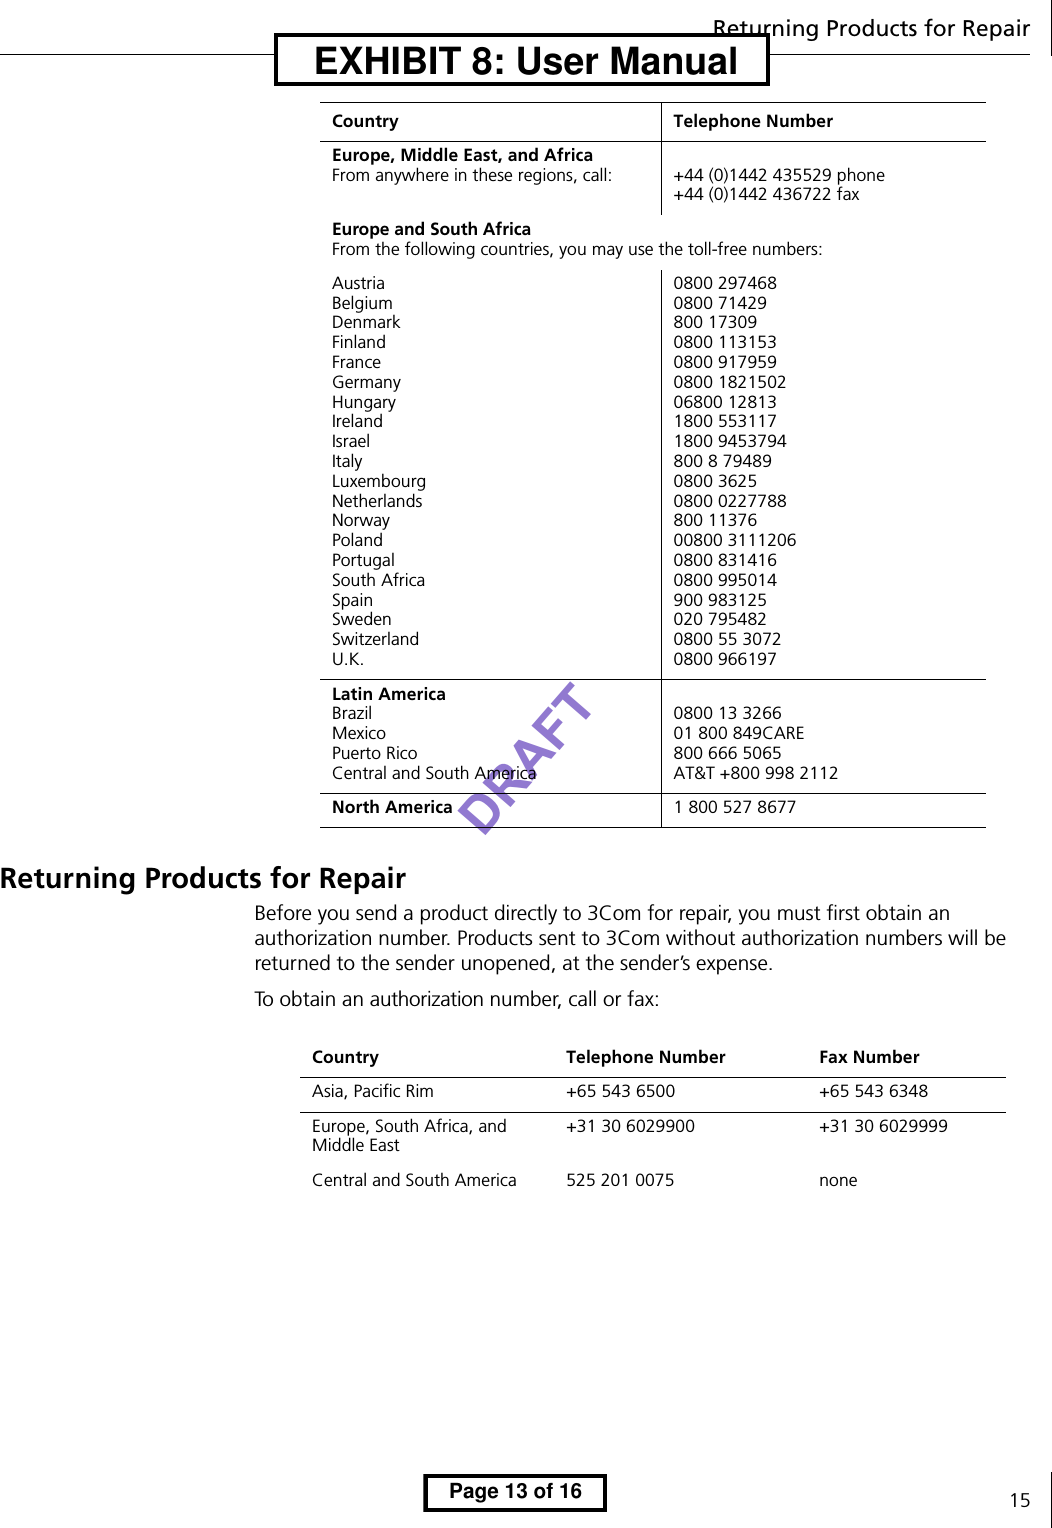 Returning Products for Repair15Returning Products for RepairBefore you send a product directly to 3Com for repair, you must first obtain an authorization number. Products sent to 3Com without authorization numbers will be returned to the sender unopened, at the sender’s expense.To obtain an authorization number, call or fax:Europe, Middle East, and AfricaFrom anywhere in these regions, call: +44 (0)1442 435529 phone+44 (0)1442 436722 faxEurope and South AfricaFrom the following countries, you may use the toll-free numbers:AustriaBelgiumDenmarkFinland FranceGermanyHungaryIrelandIsraelItalyLuxembourgNetherlandsNorwayPolandPortugalSouth AfricaSpainSwedenSwitzerlandU.K.0800 2974680800 71429800 173090800 1131530800 9179590800 182150206800 128131800 5531171800 9453794800 8 794890800 36250800 0227788800 1137600800 31112060800 8314160800 995014900 983125020 7954820800 55 30720800 966197Latin AmericaBrazilMexicoPuerto RicoCentral and South America0800 13 326601 800 849CARE800 666 5065AT&amp;T +800 998 2112North America 1 800 527 8677Country Telephone NumberCountry Telephone Number Fax NumberAsia, Pacific Rim +65 543 6500 +65 543 6348Europe, South Africa, and Middle East+31 30 6029900 +31 30 6029999Central and South America 525 201 0075 none   EXHIBIT 8: User Manual   Page 13 of 16